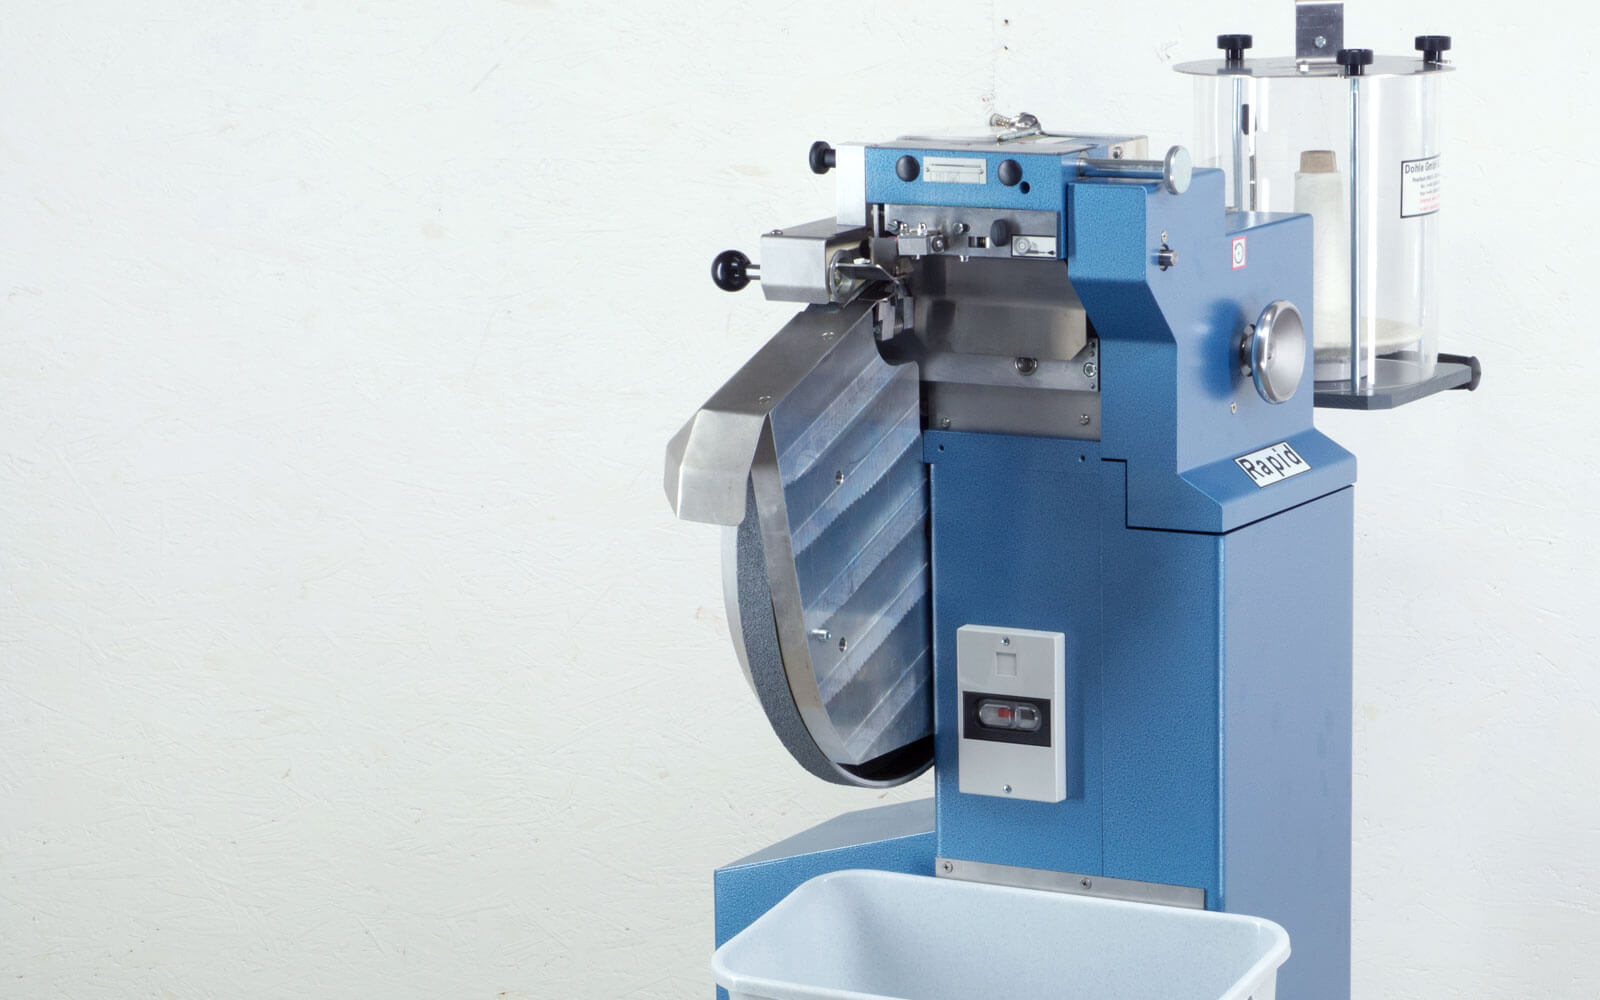 Rapid-S industrial sewing machine by Dohle